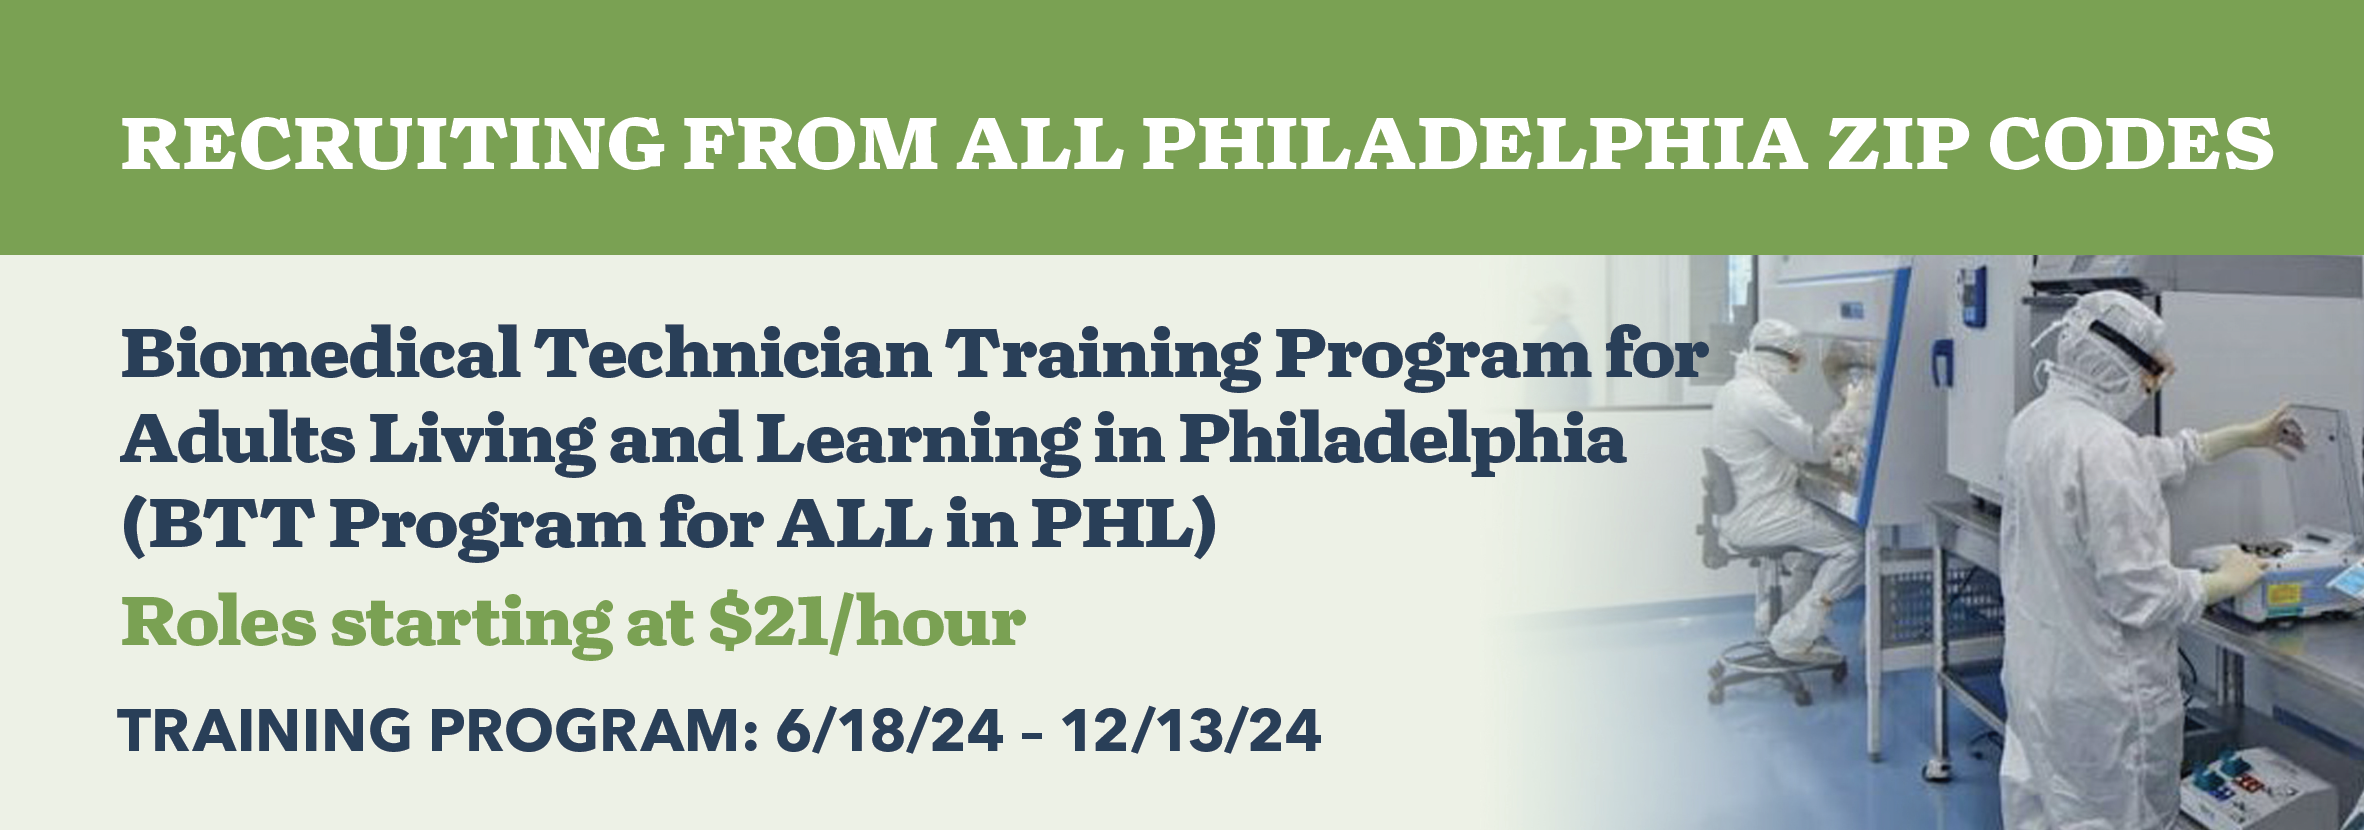 Recruiting Biomedical Technician Training Program for Adults Living and Learning in Philadelphia (BTT Program for ALL in PHL) Roles starting at $21/hour TRAINING PROGRAM: 6/18/24 – 12/13/24